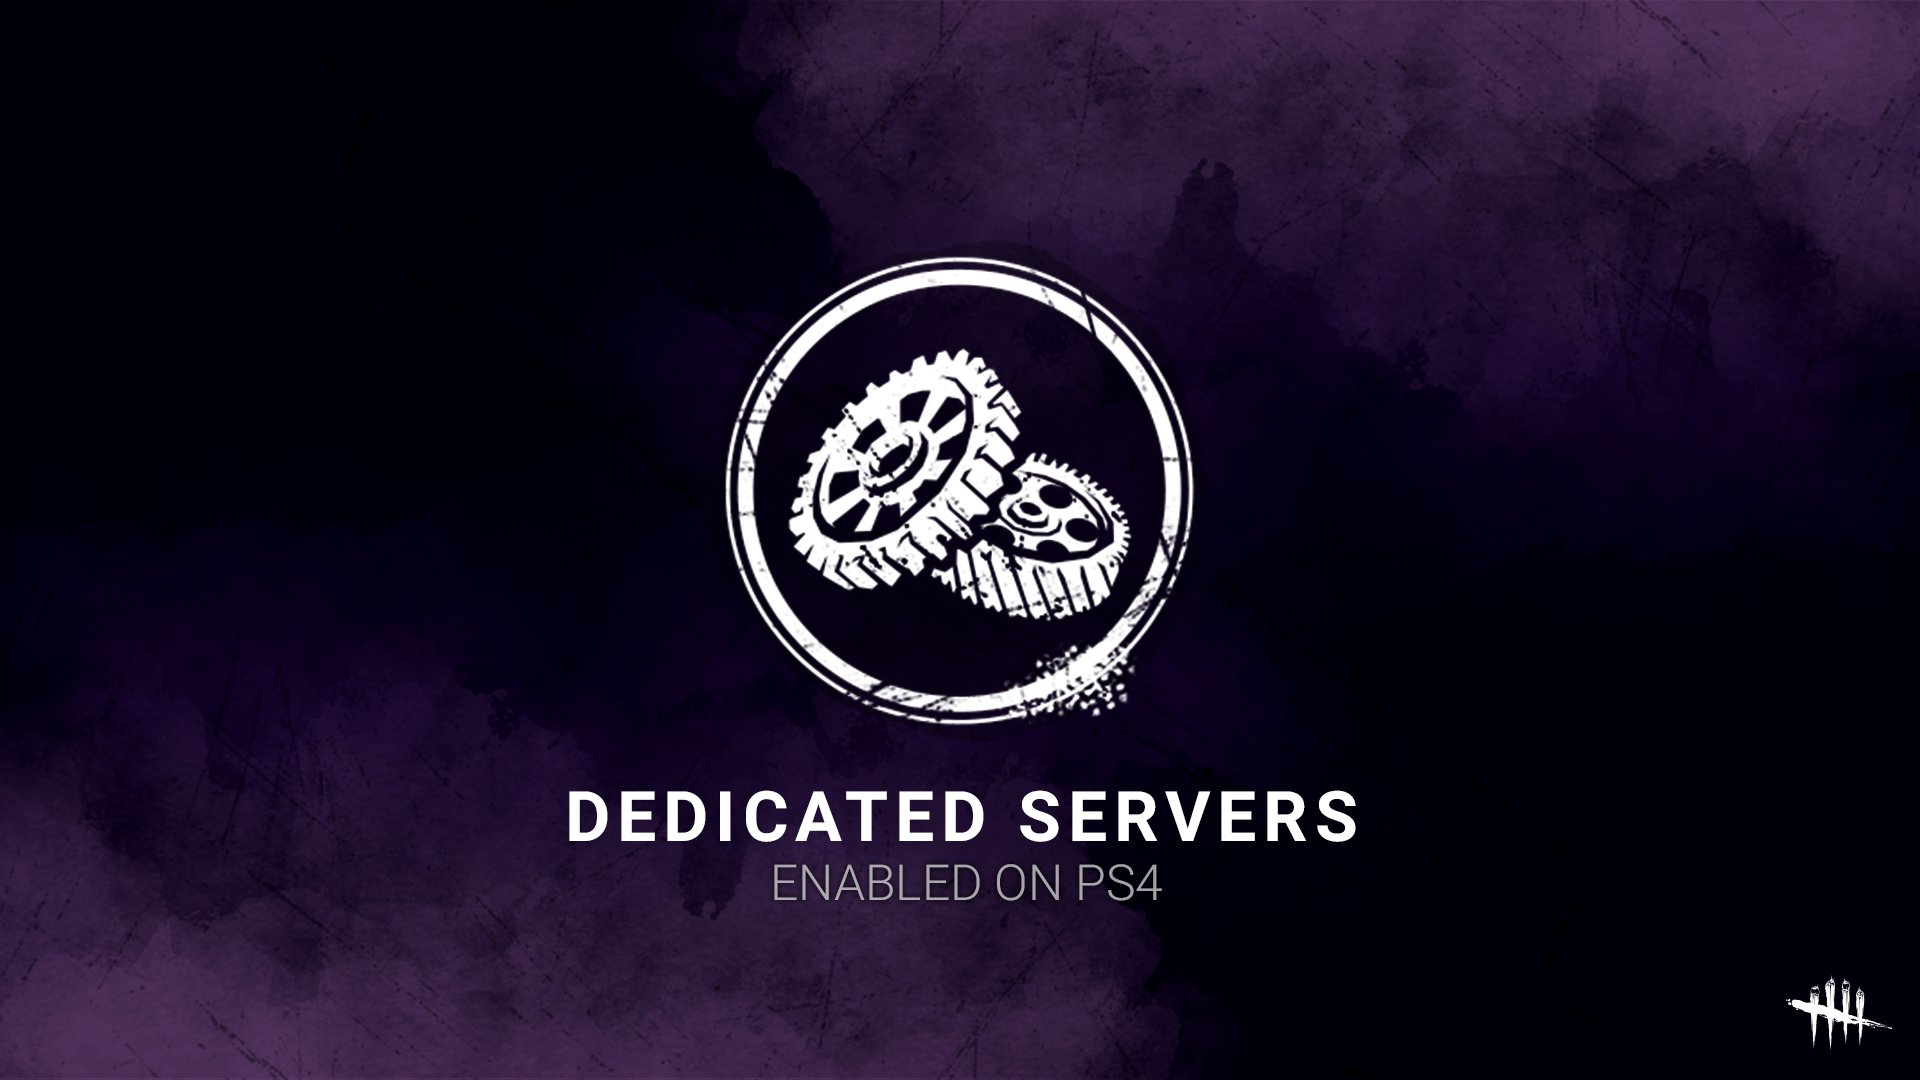 Regenachtig huiswerk climax Dead by Daylight on Twitter: "Dedicated servers are now enabled for the PS4  version of the game. If you encounter any issues, please be sure to report  them here: https://t.co/eQzP4c4YJ1 We plan